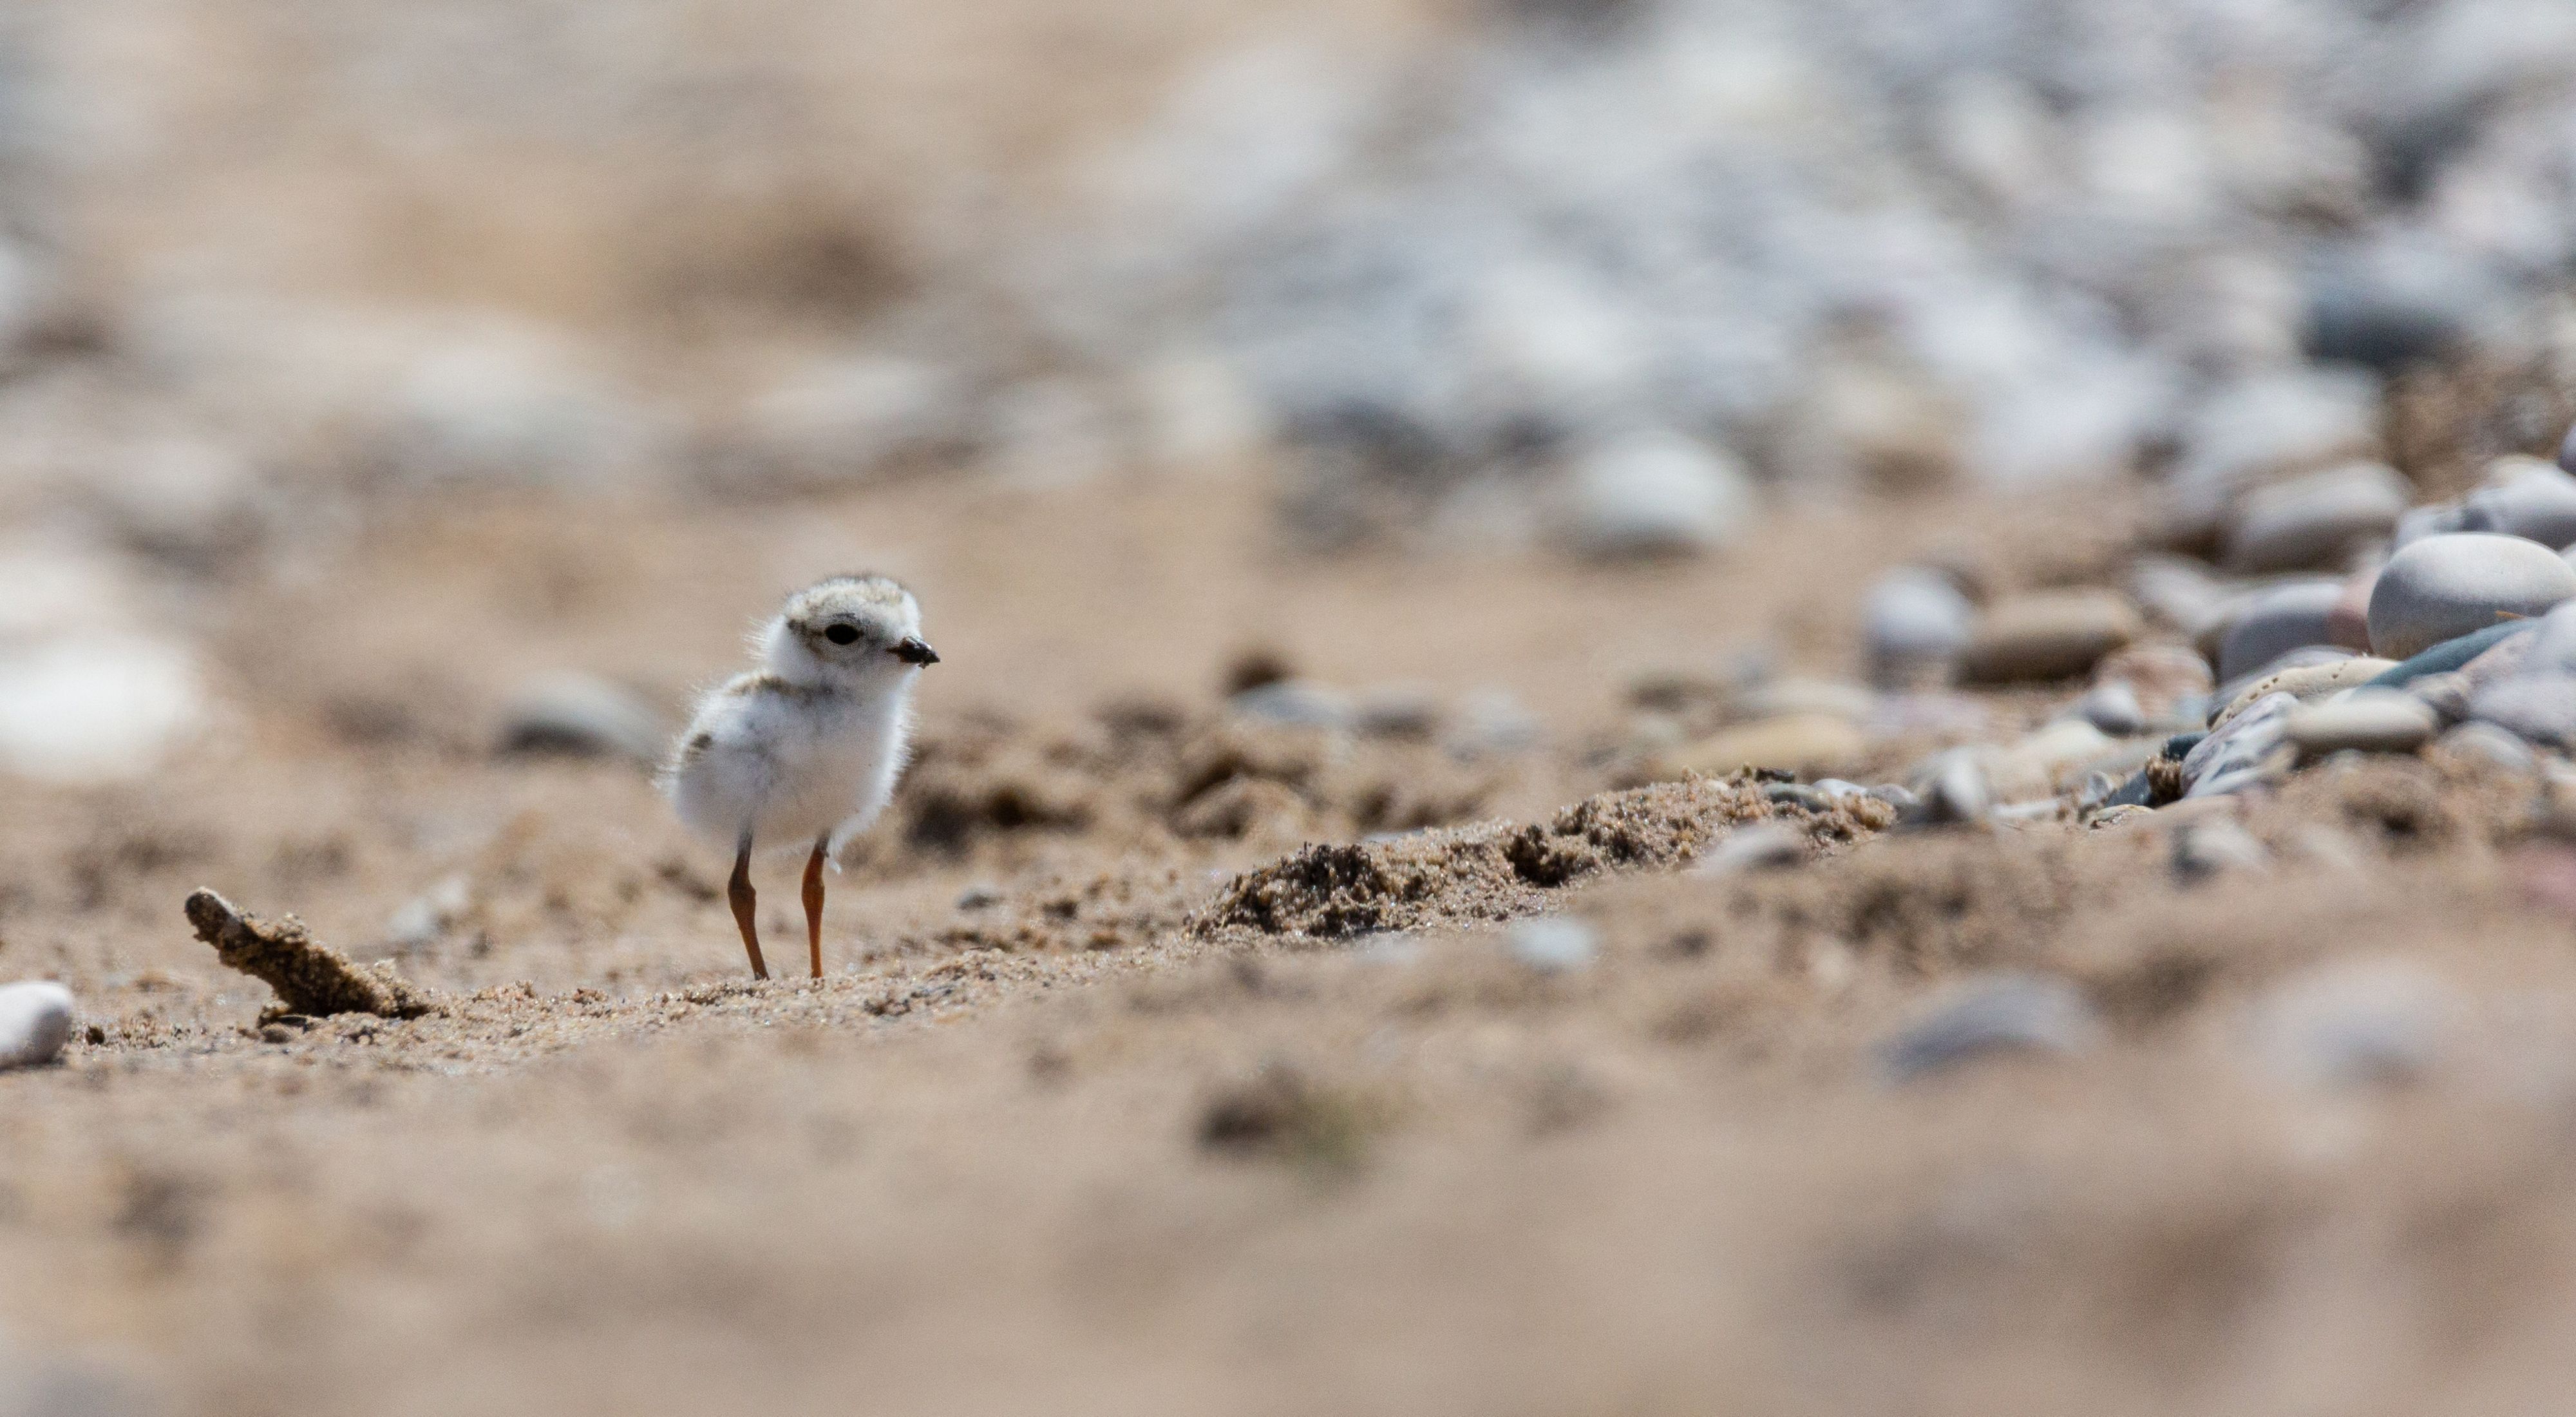 Closeup of a tiny piping plover chick standing on sand. 